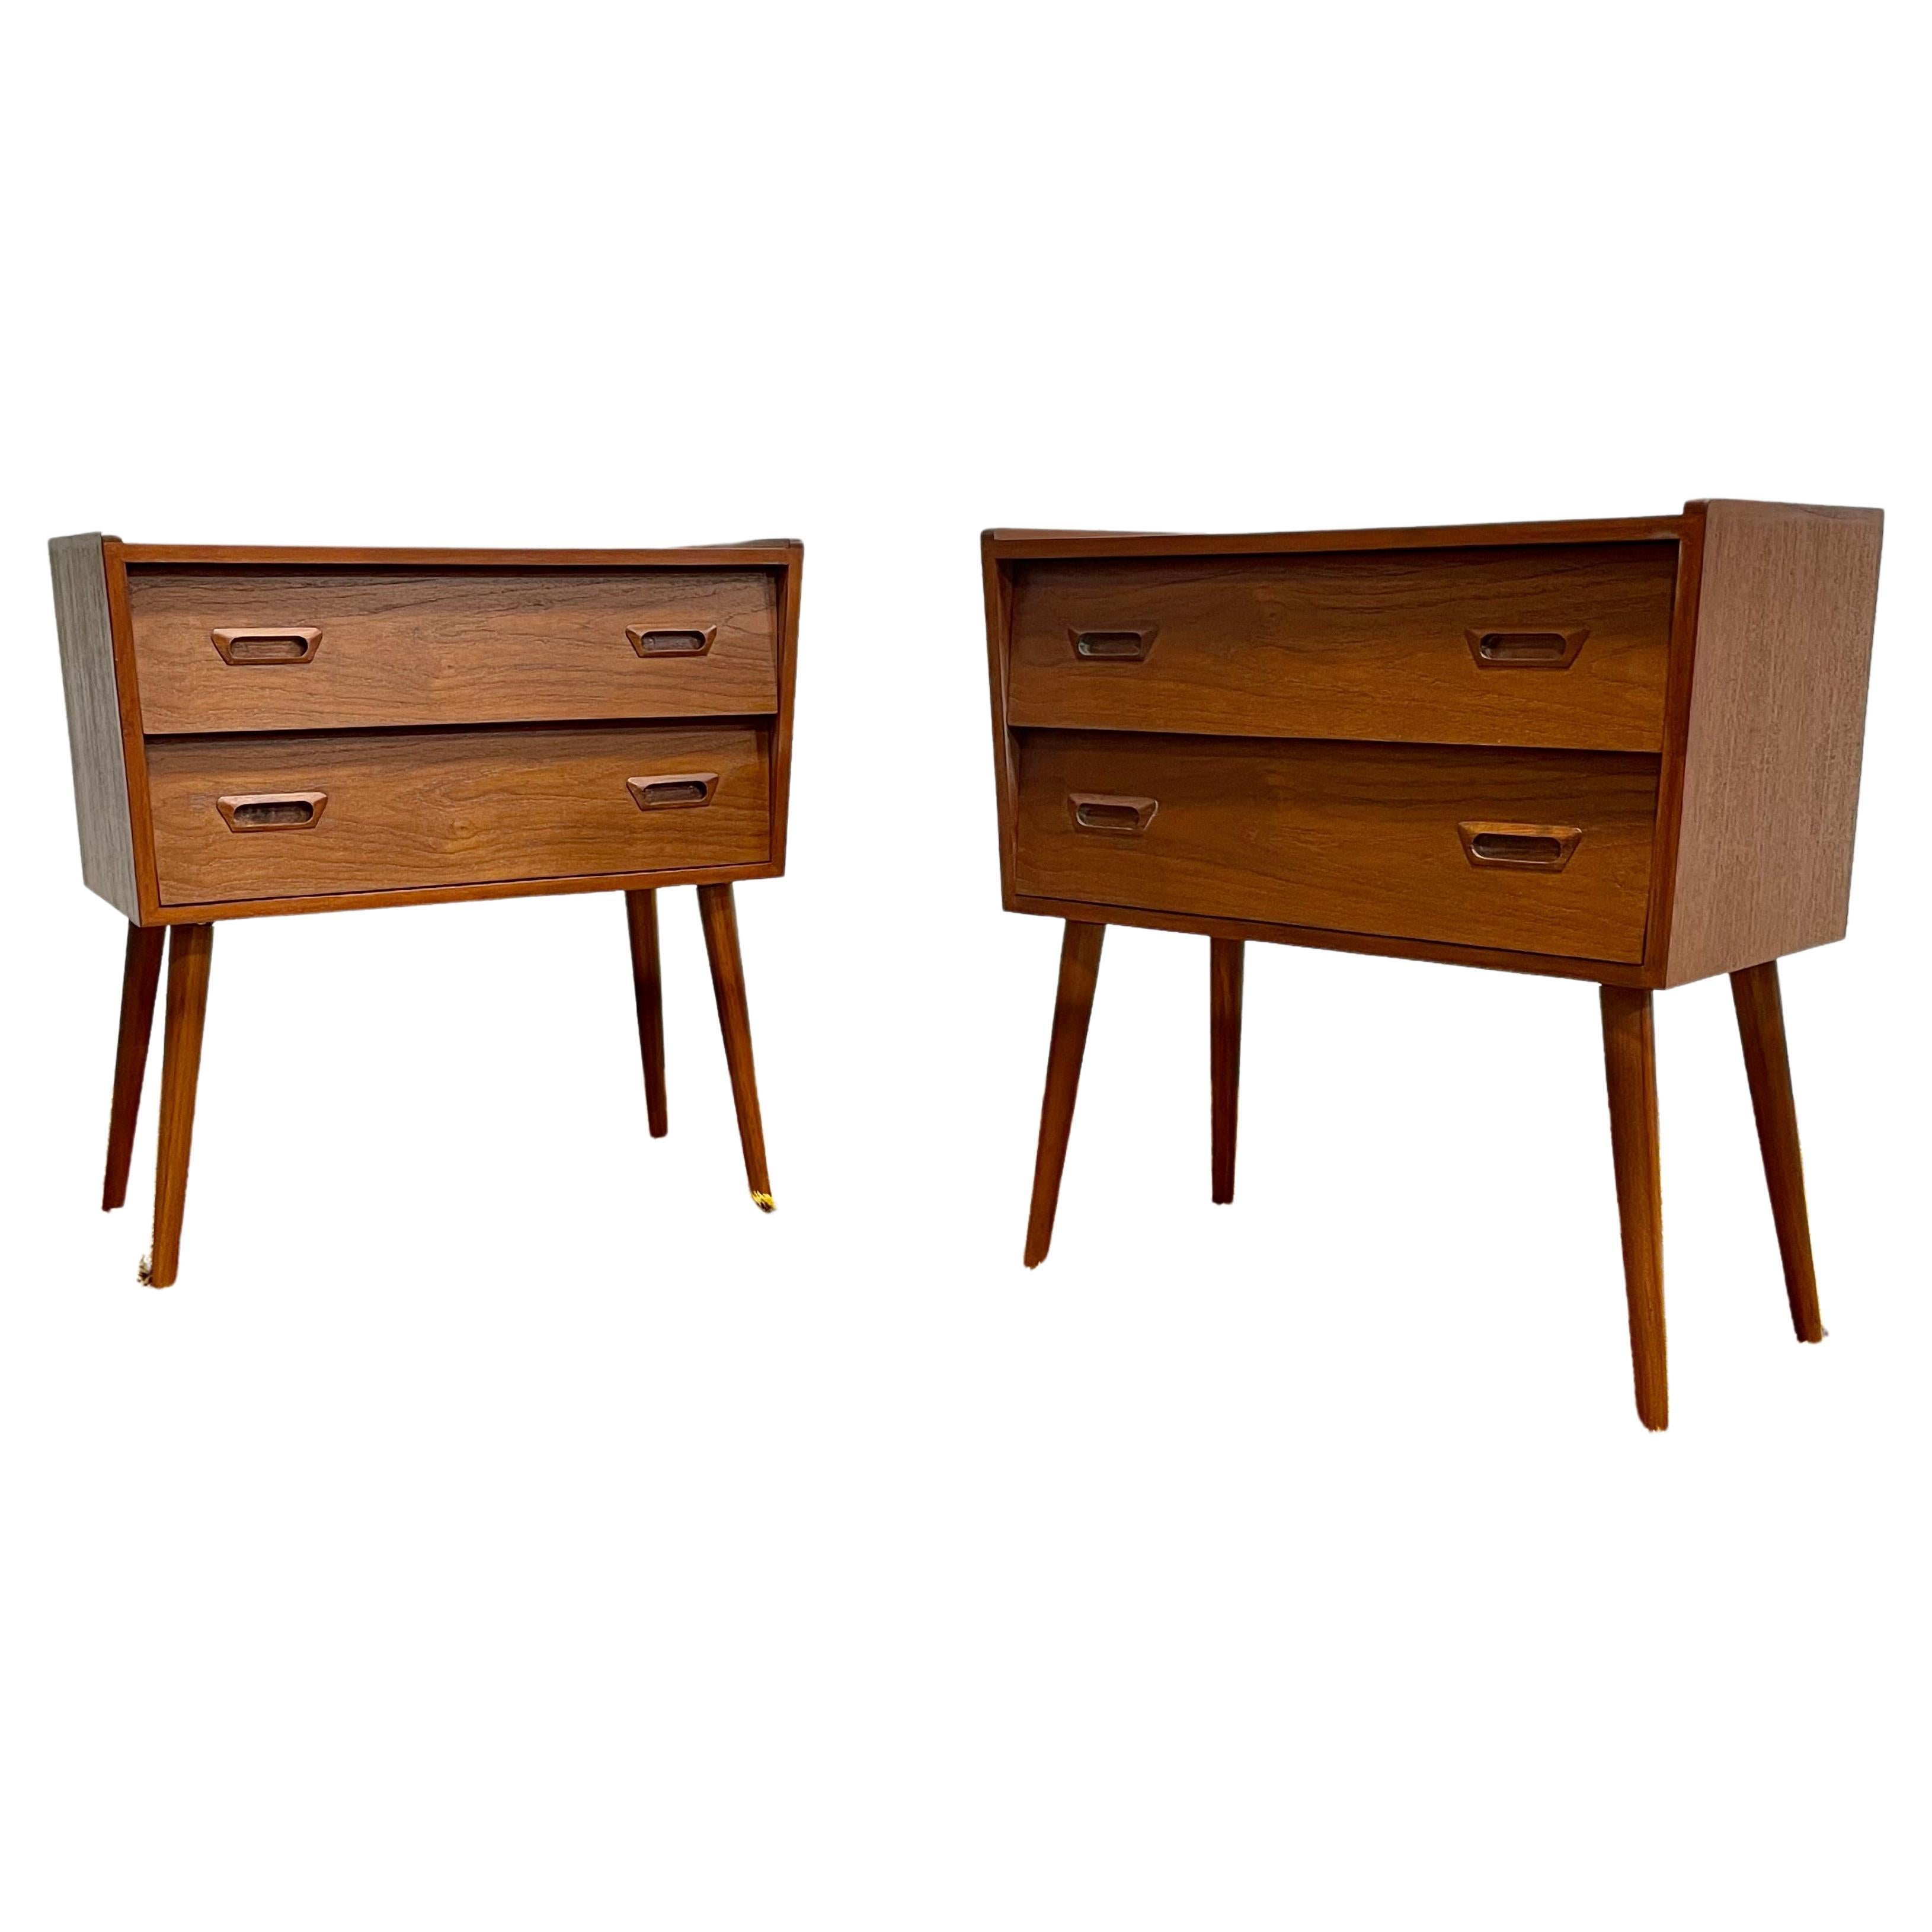 Pair of Mid-Century Modern styled teak nightstands. Gorgeous asymmetrical design featuring loads of design details including 'eyelid' handpulls, finished backs and long tapered legs. Two drawers for all your bedtime essentials. Excellent condition,